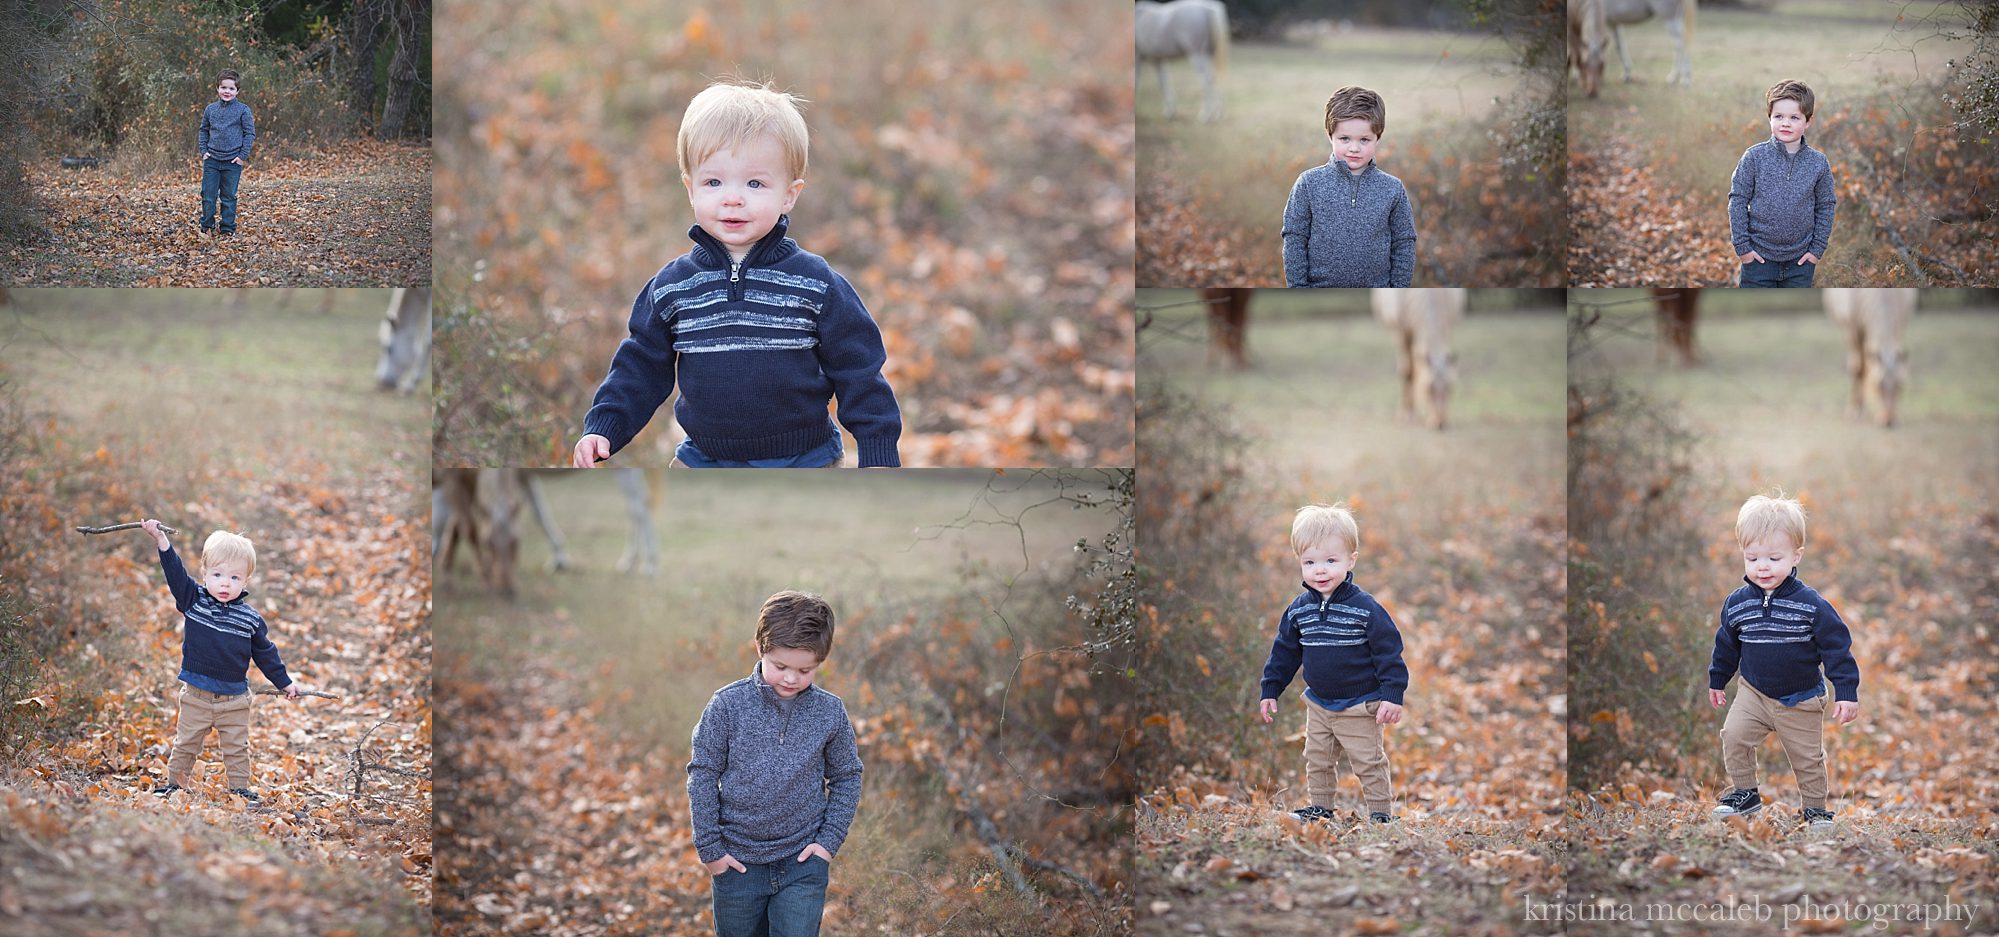 Family Photography in the Fall Leaves in Dallas, Tx